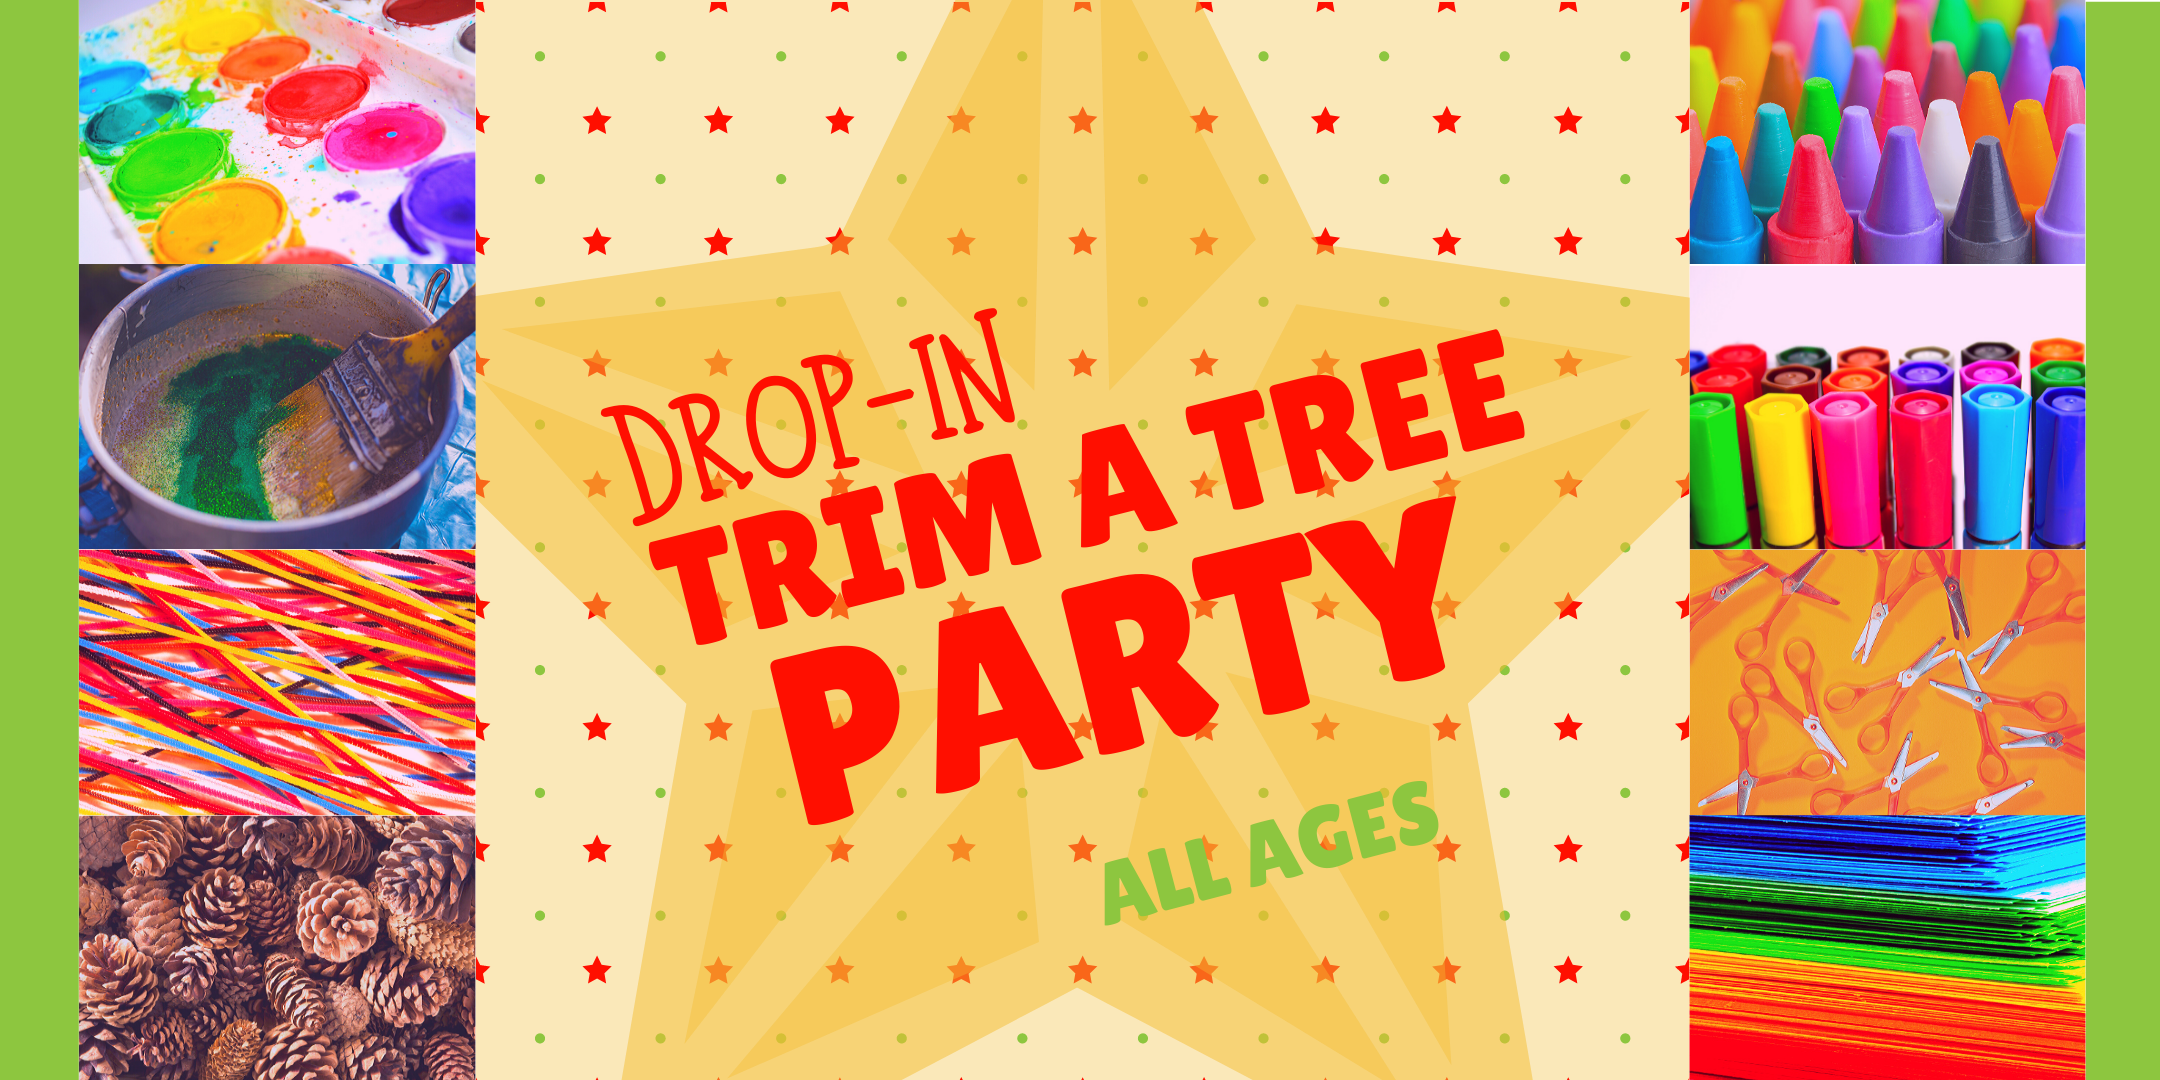 Drop-in Trim a Tree Party All Ages